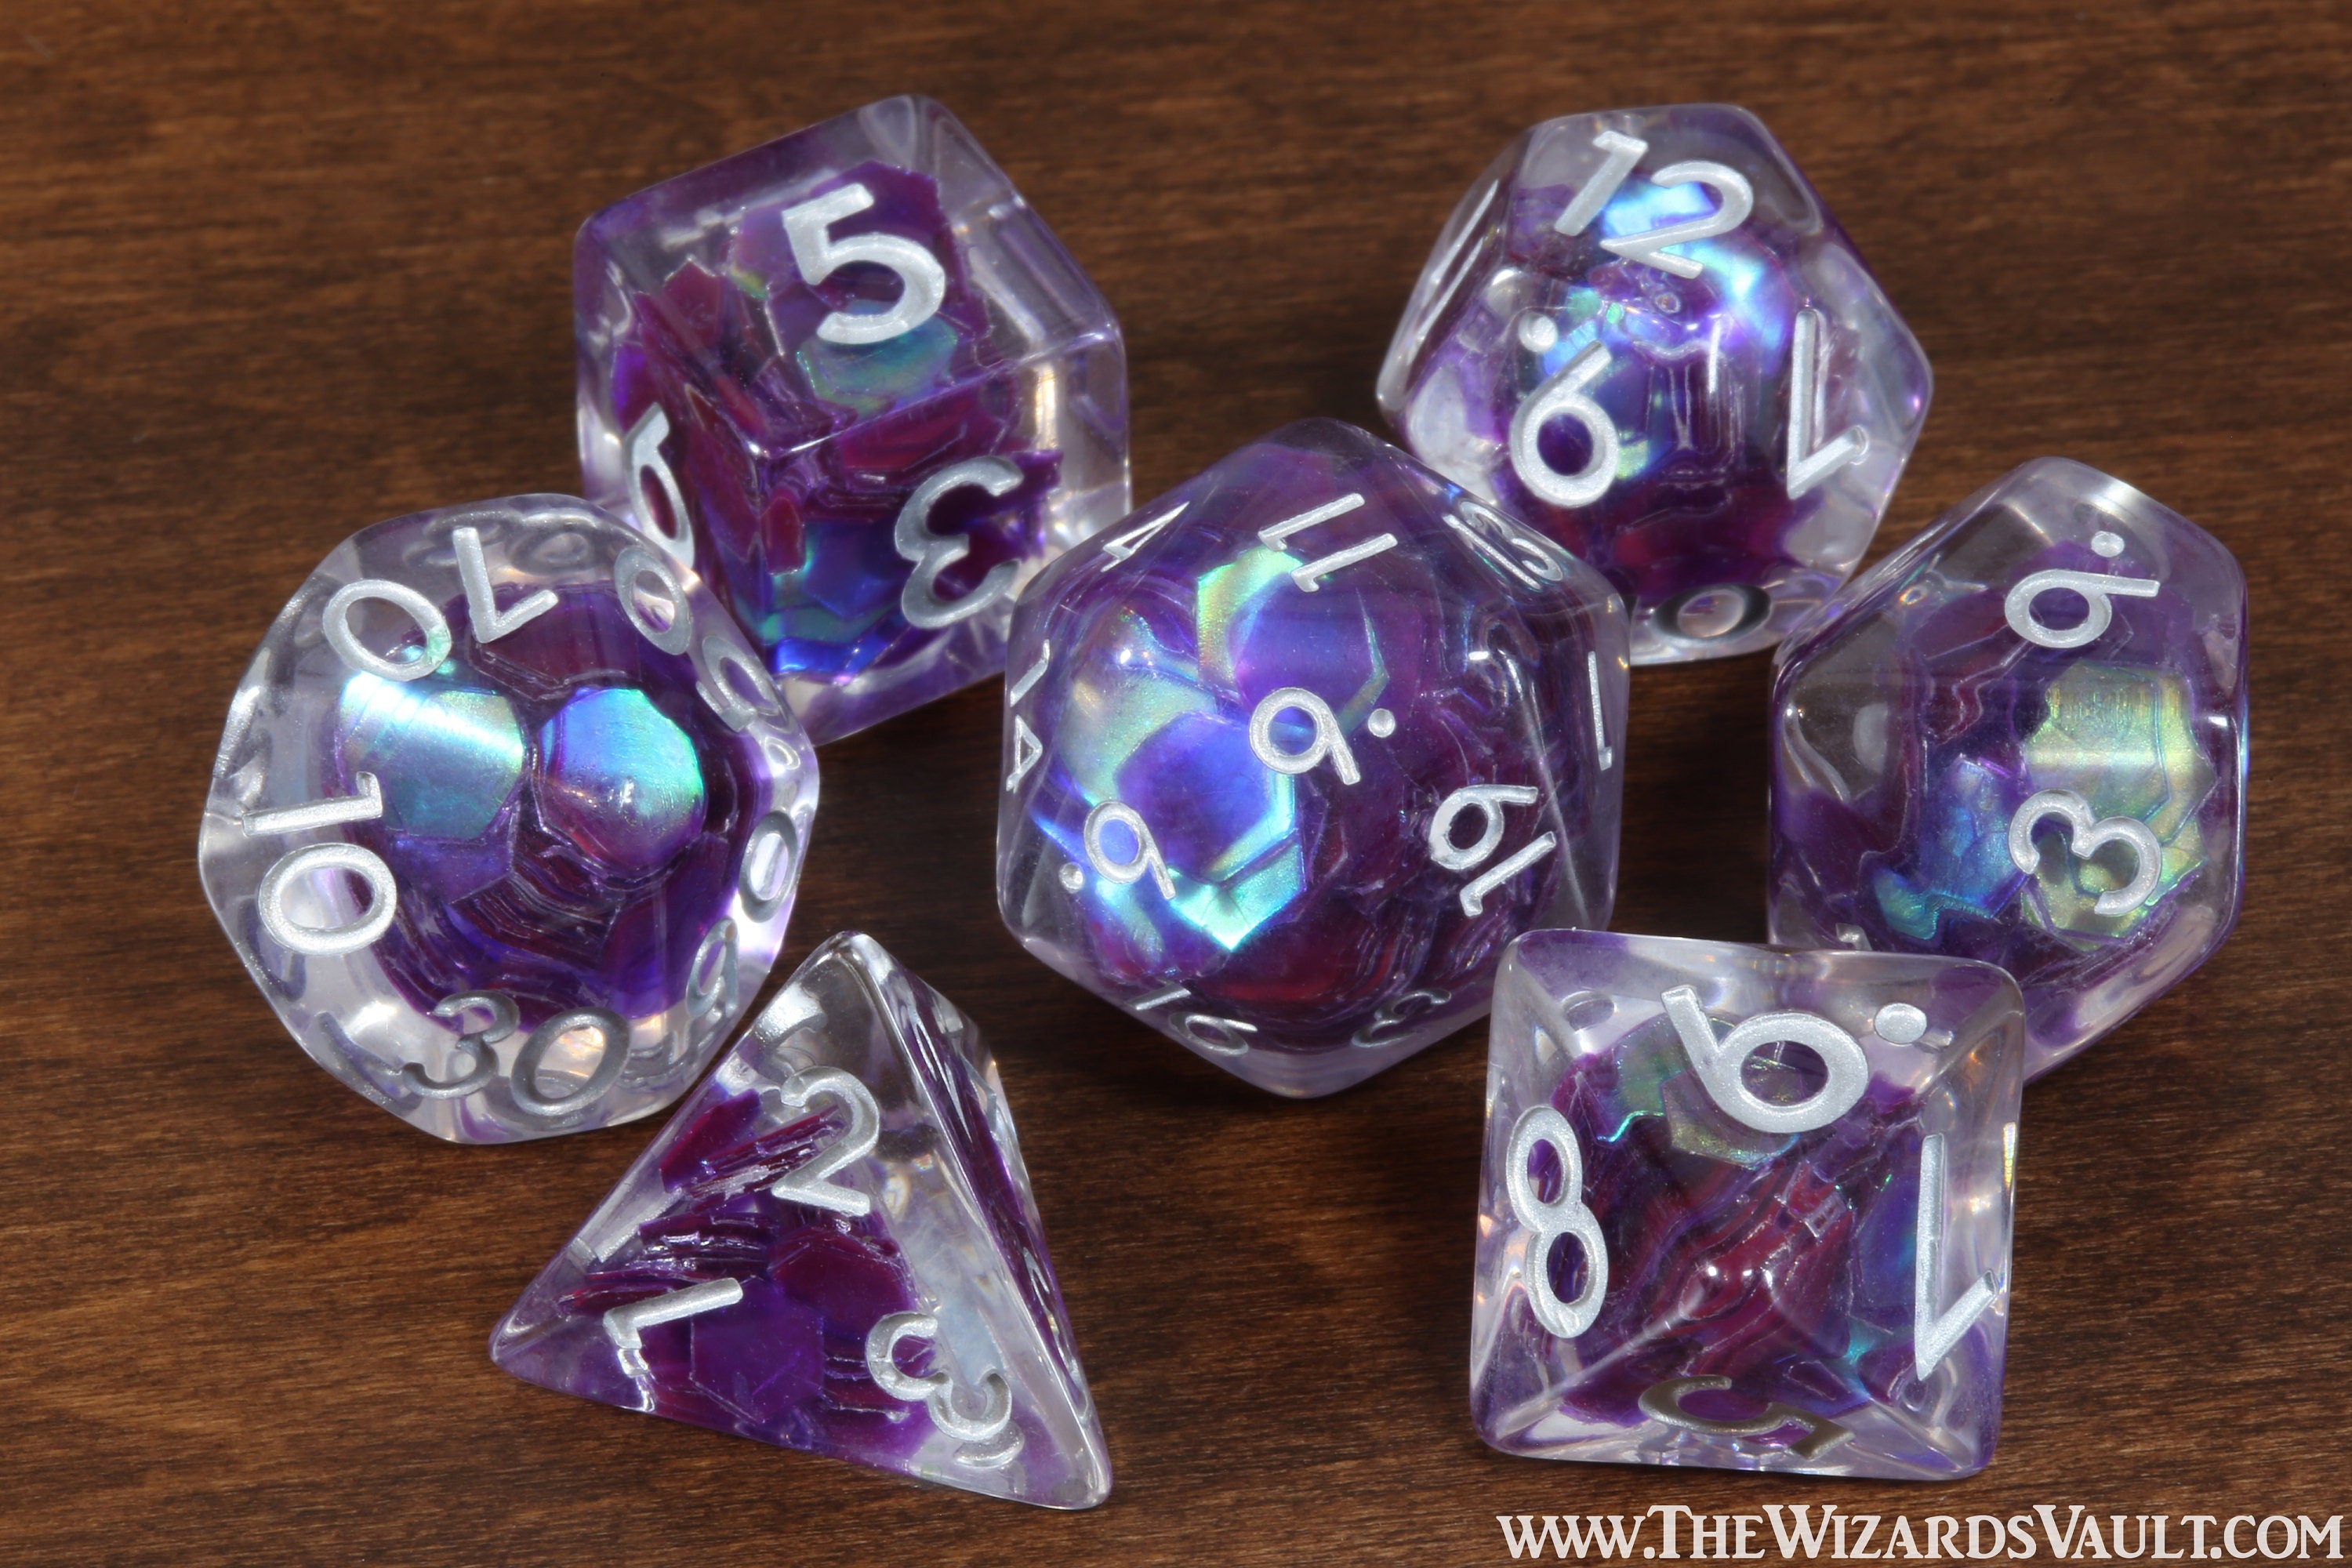 Naga Scales Dice Set - Transparent with large purple turquoise holographic confetti glitters, DND Dice set for Dungeons and Dragons - The Wizard's Vault